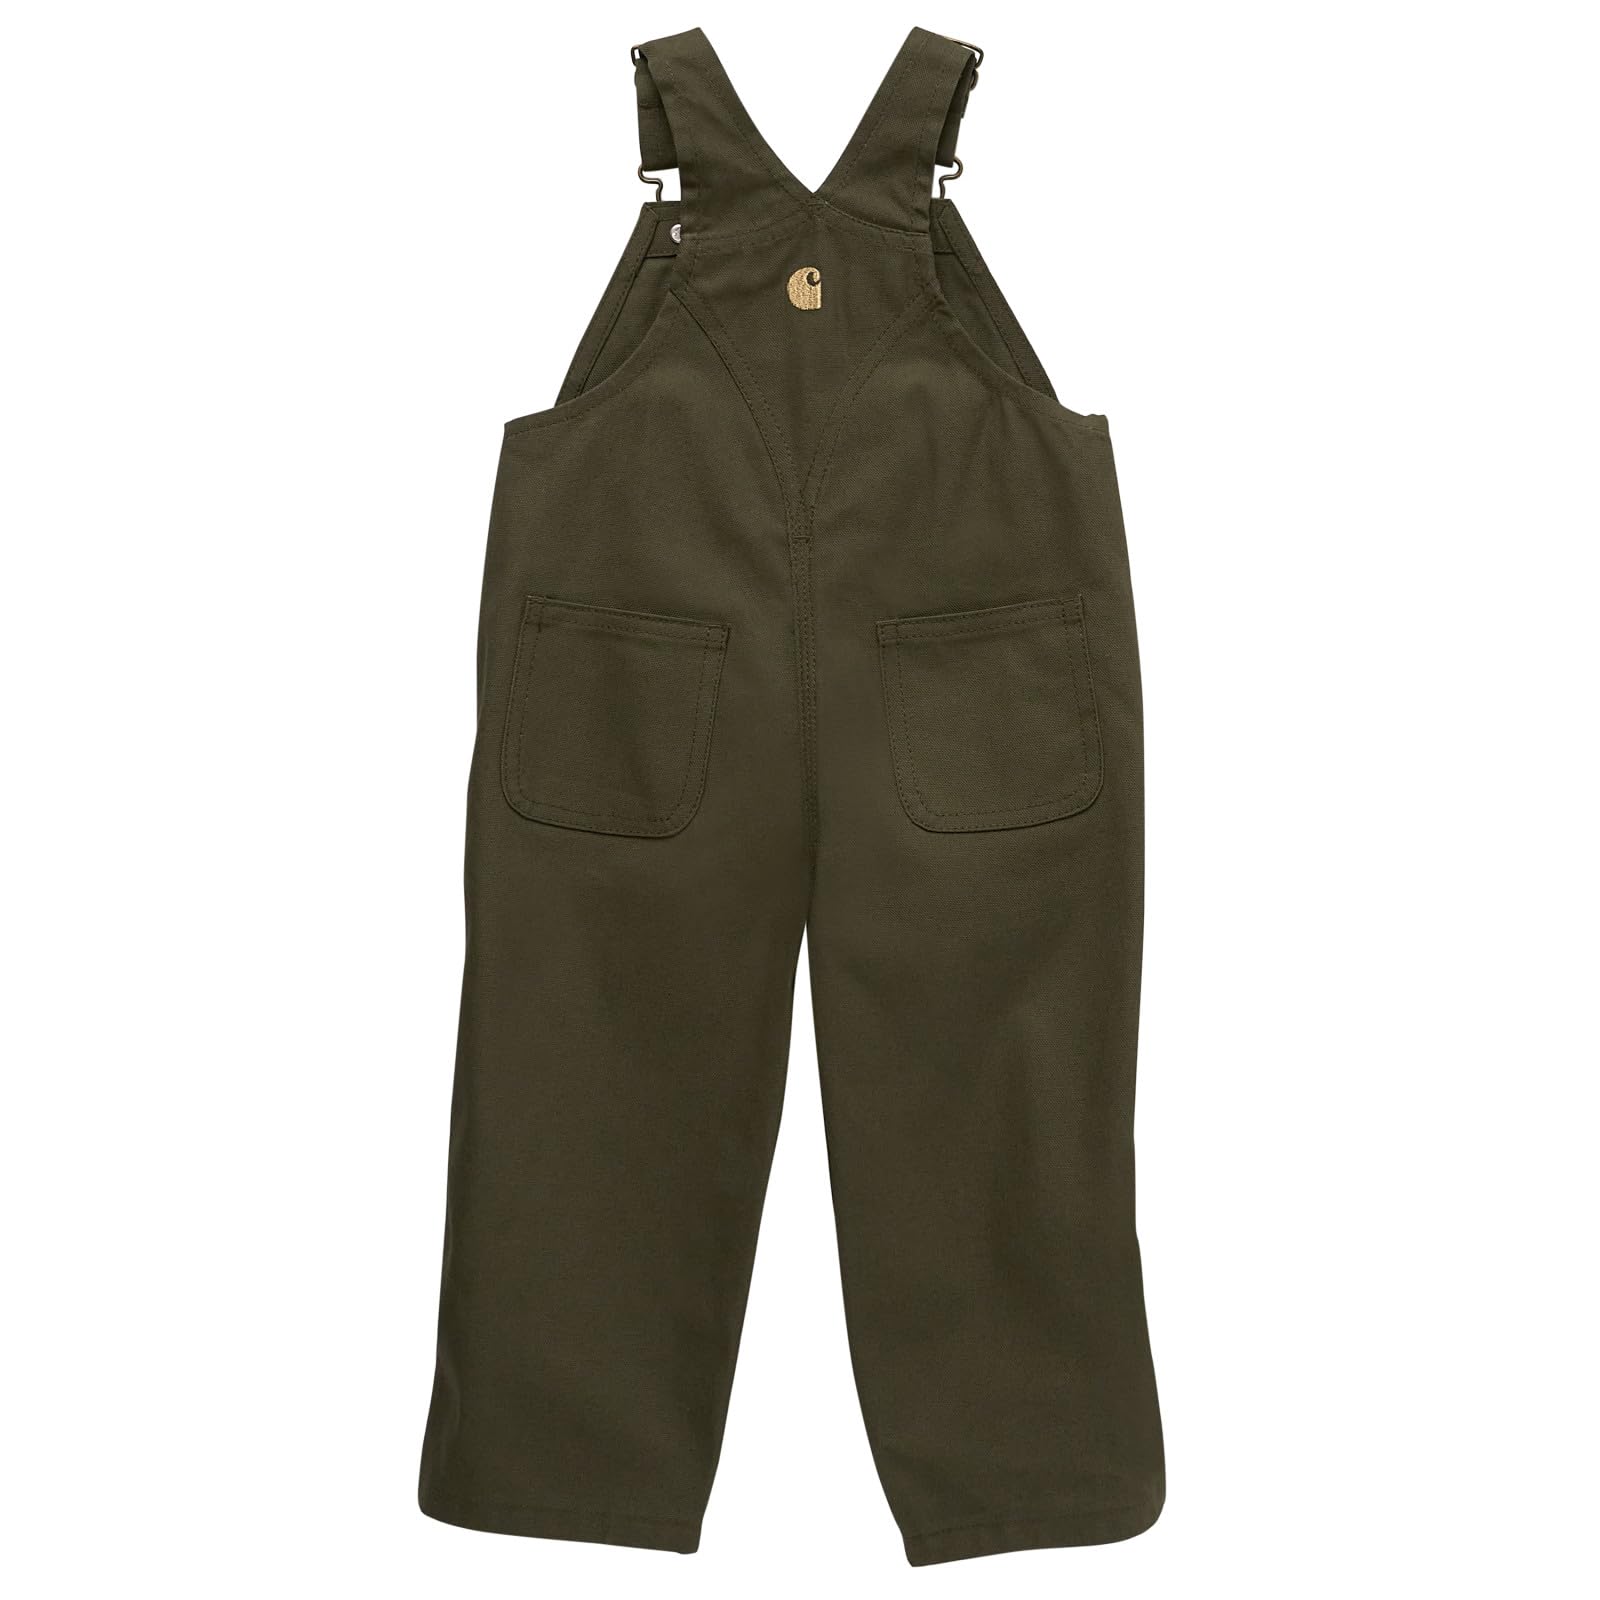 Carhartt Boys Loose Fit Canvas Bib Overall, Olive Green, 3 Months